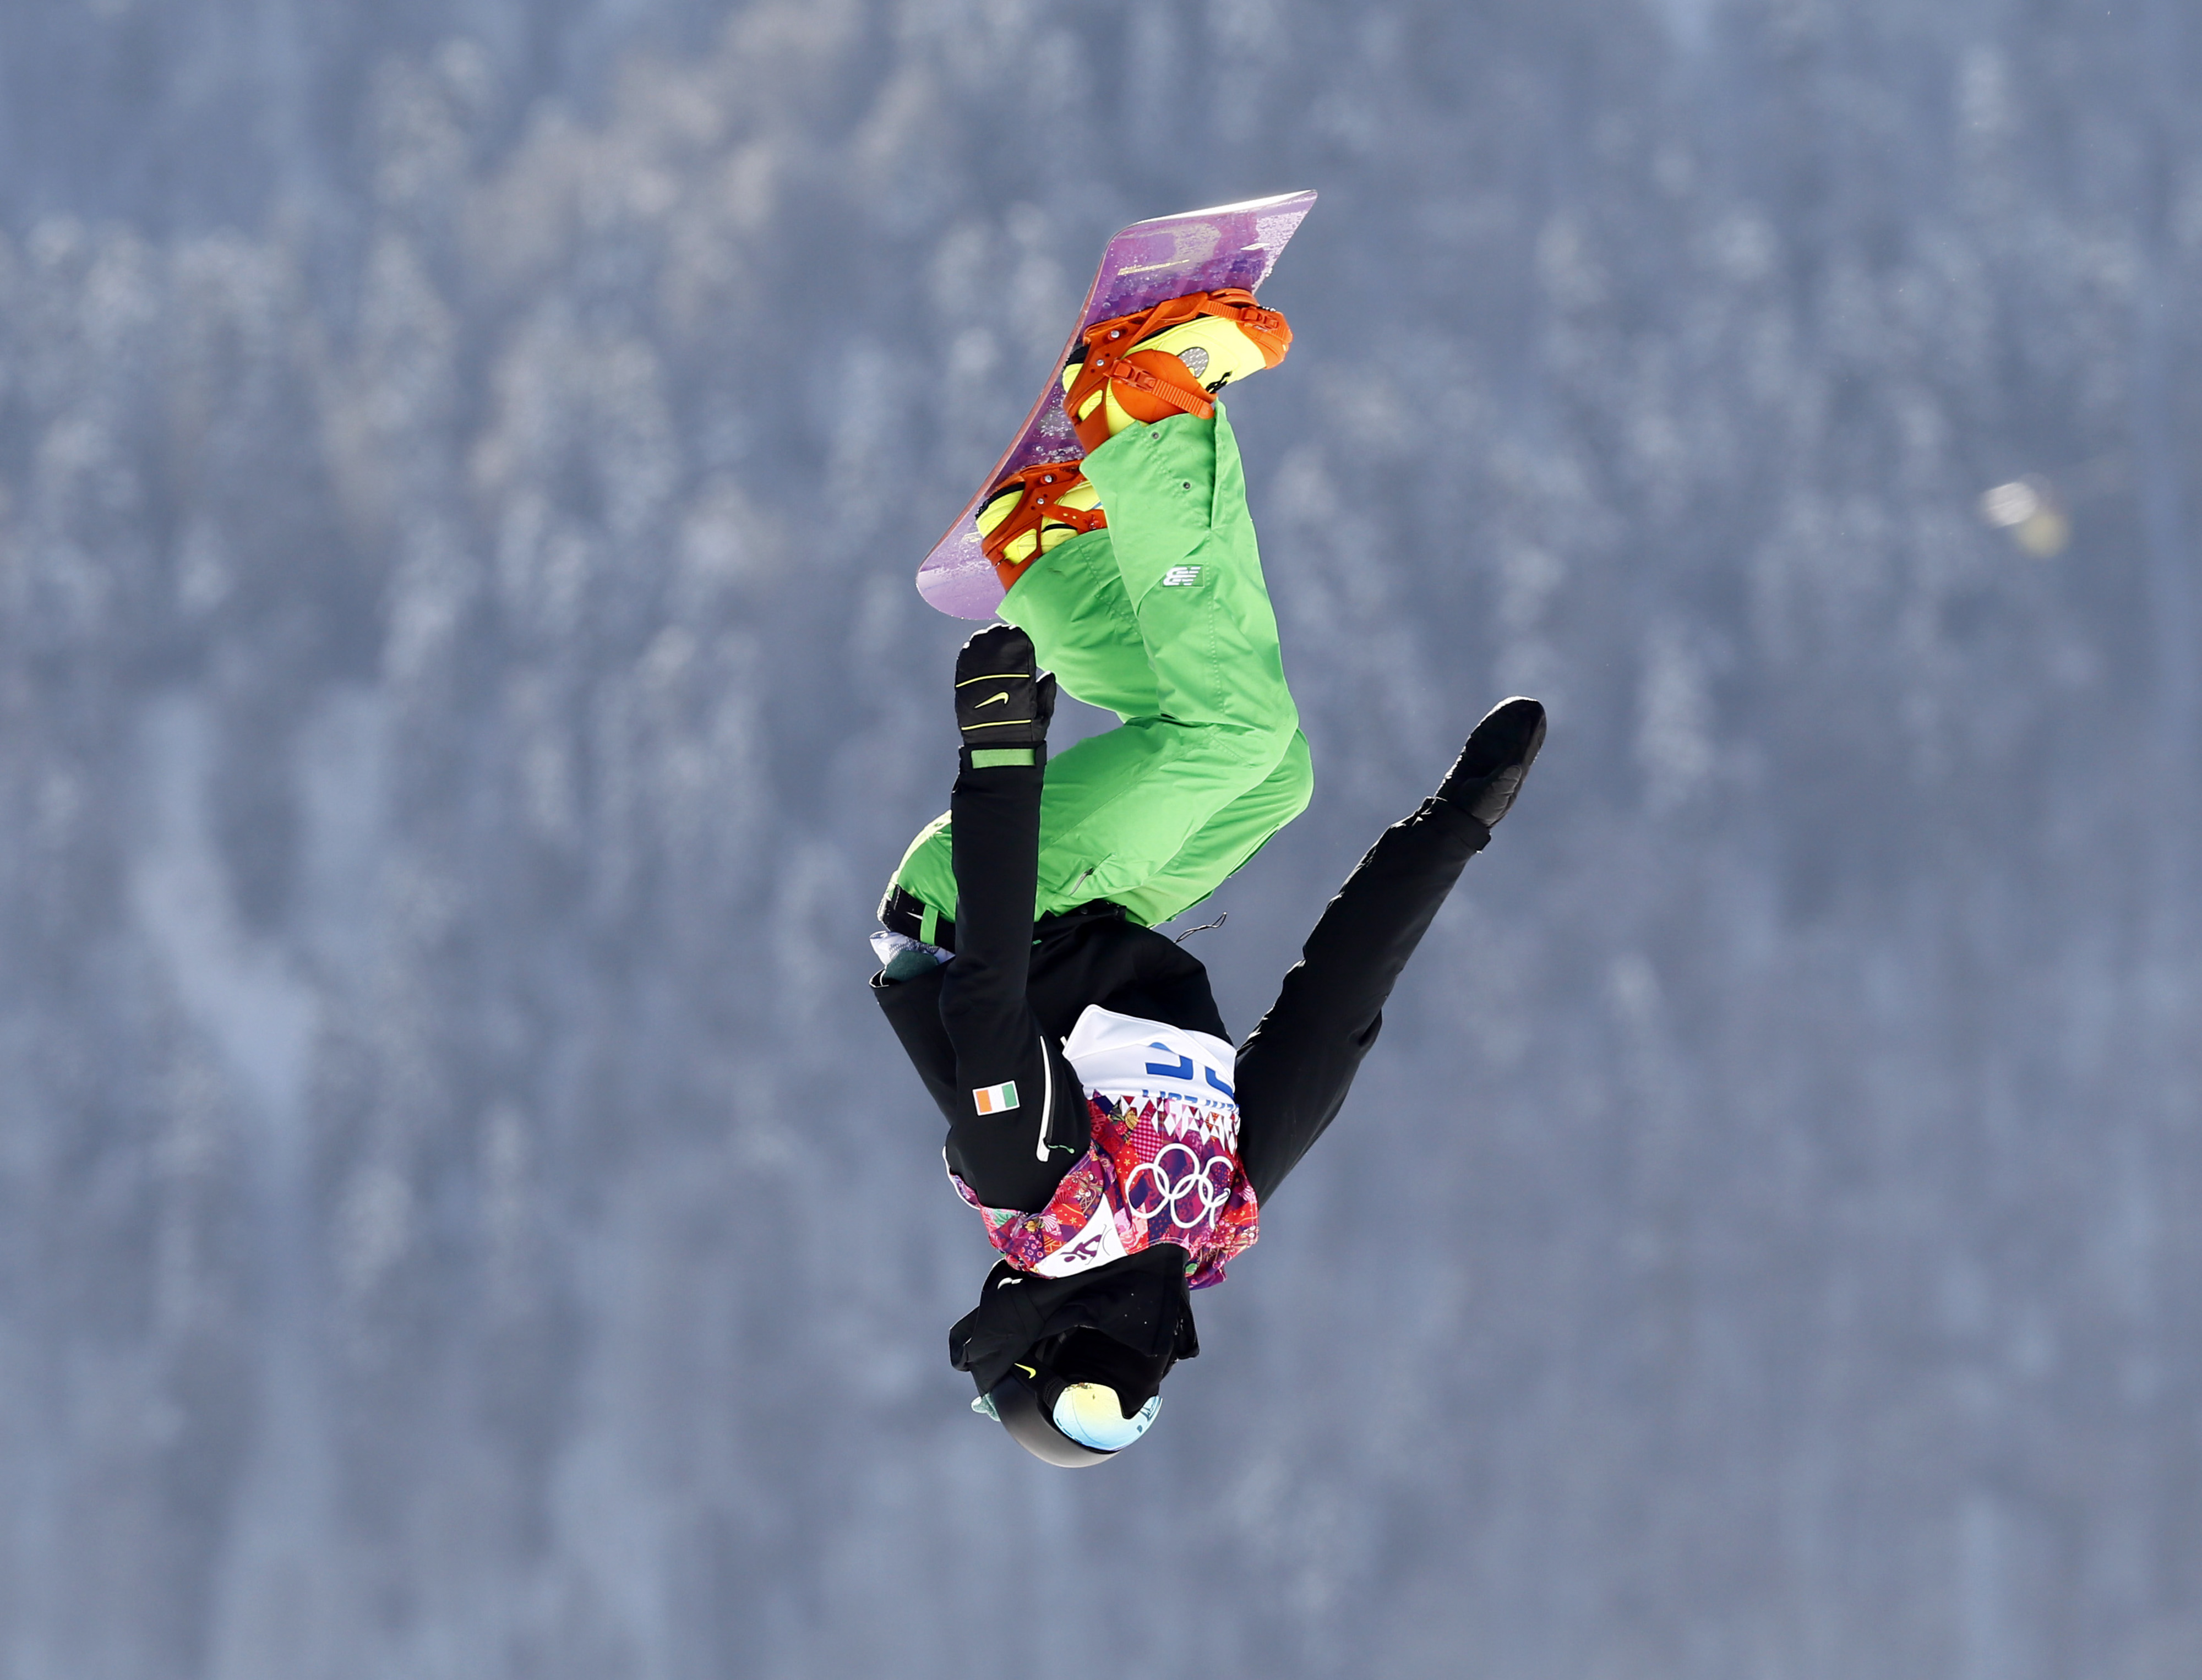 Winter Olympics 2014 The Best Photos From Day 1 In Sochi Crooks and